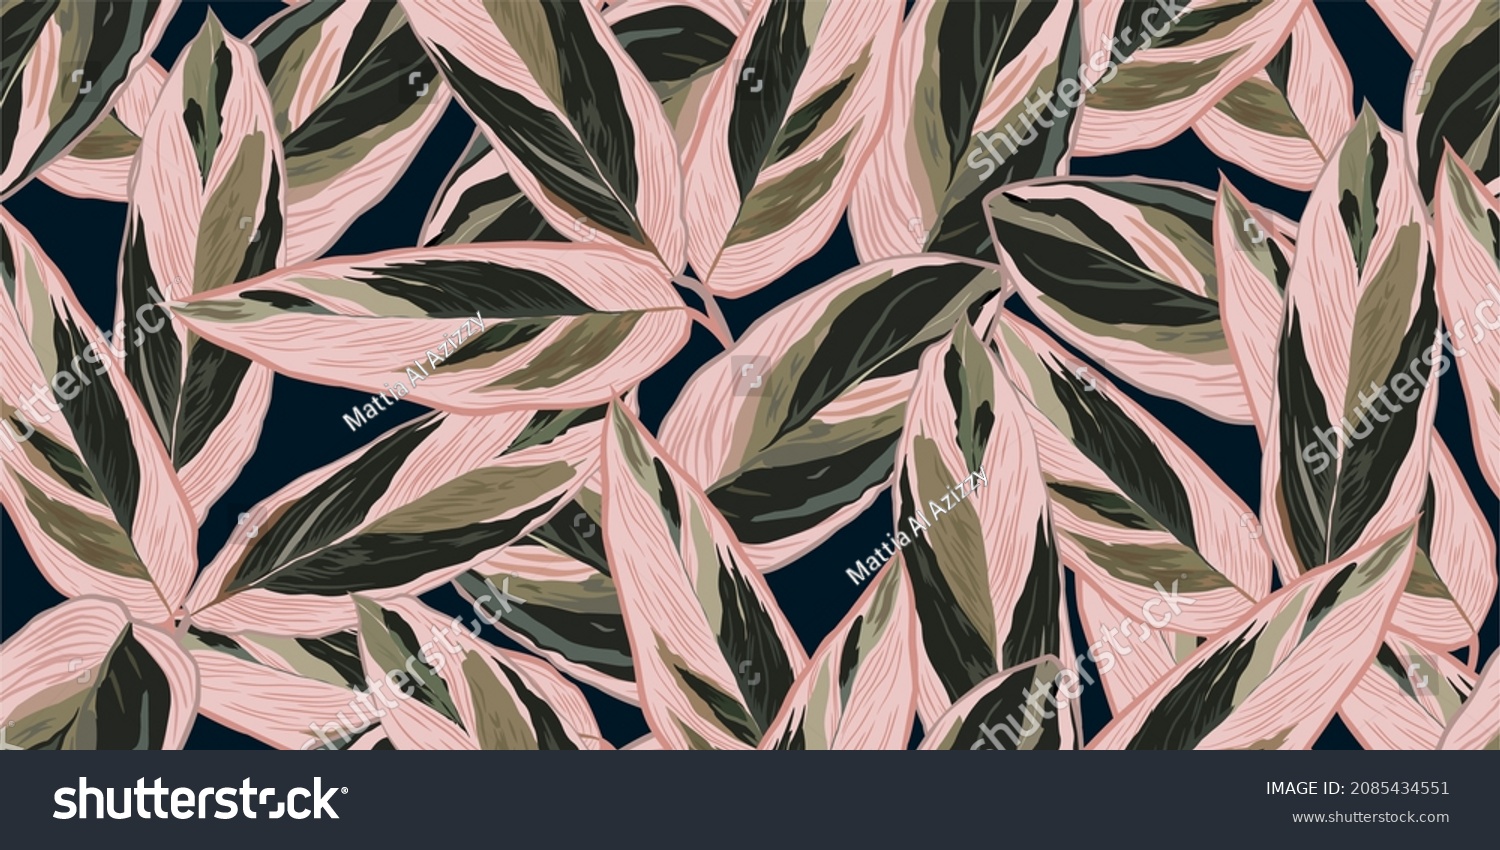 Luxury realistic and nature green background vector. Tropical leaves seamless pattern. Stromanthe triostar. design for interior design, Background, fashion, fabric, wallpaper, gift paper, and textiles #2085434551